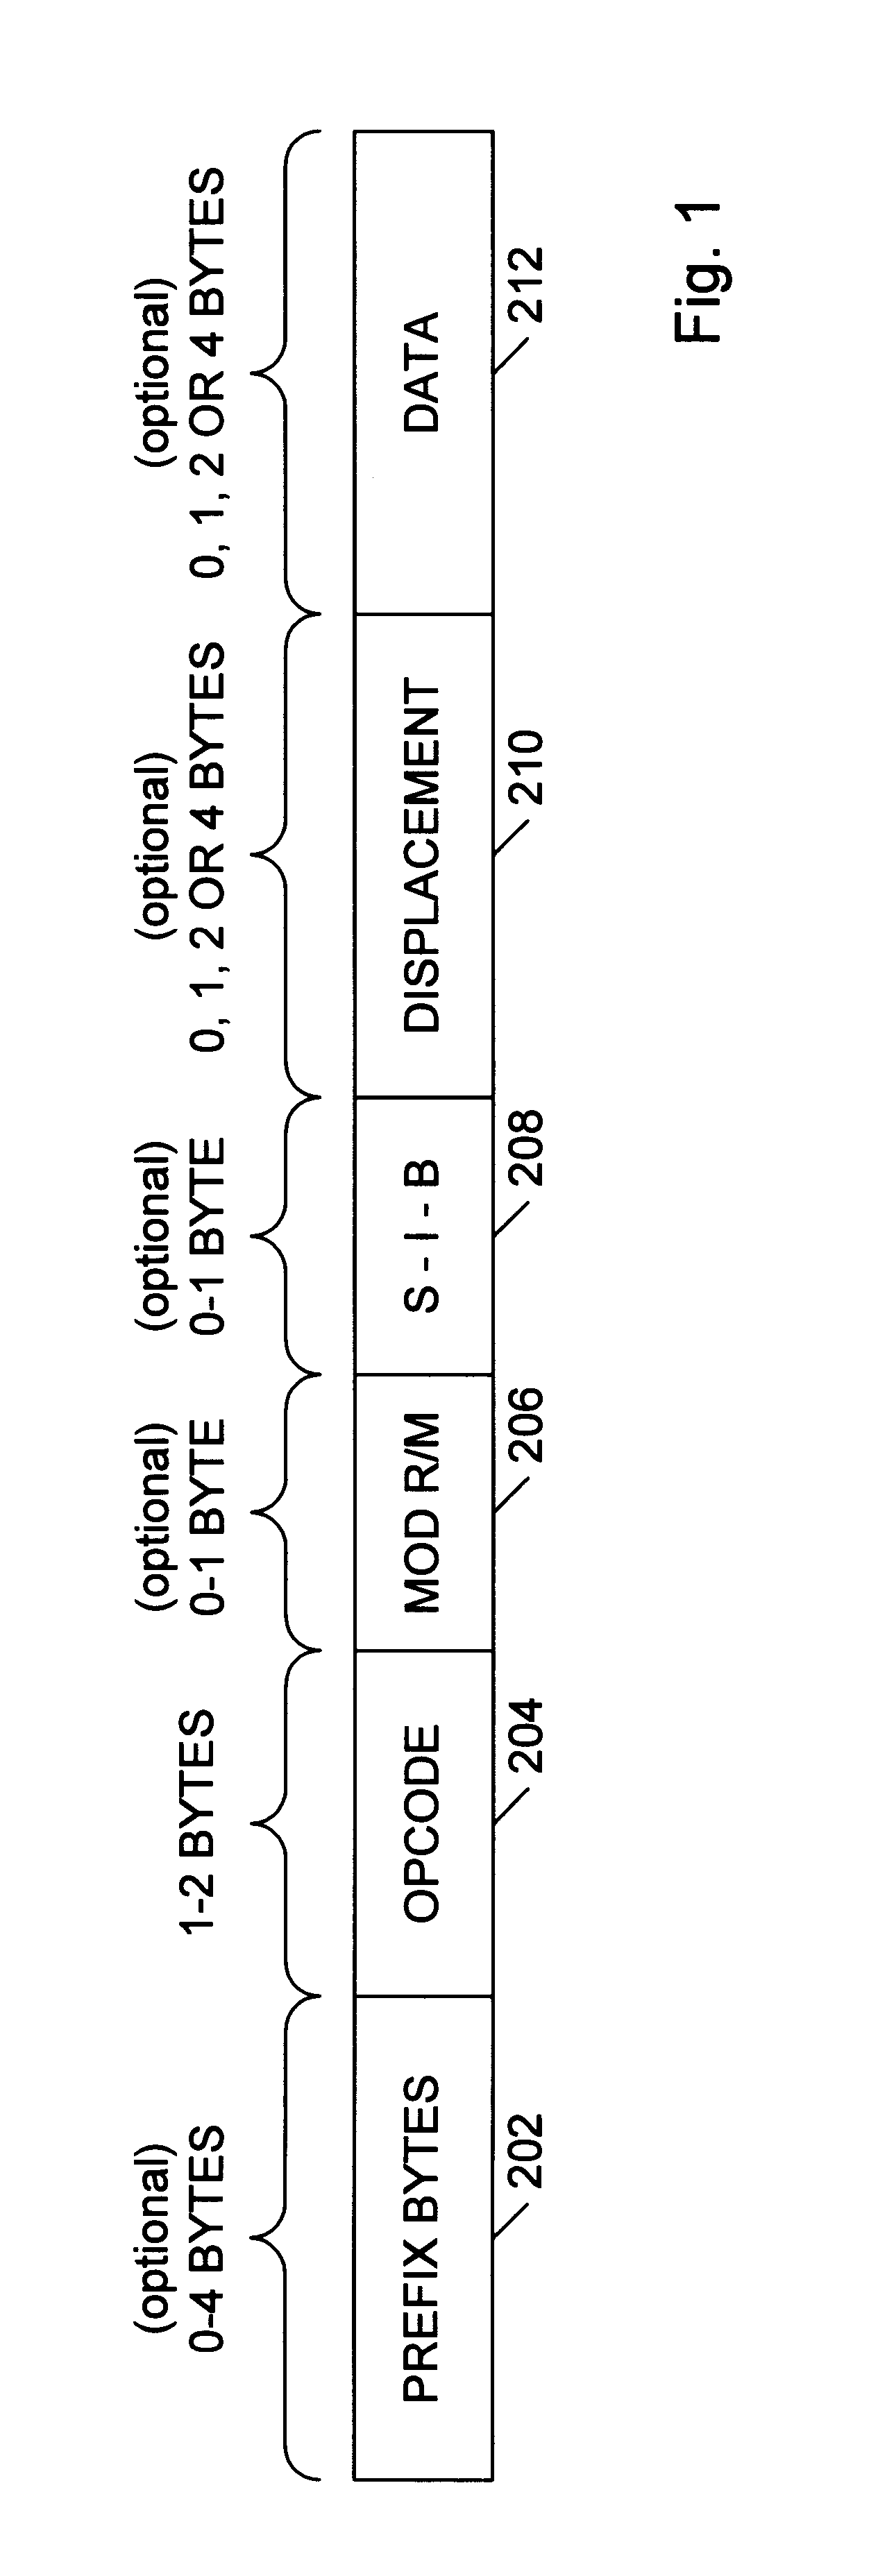 Basic block oriented trace cache utilizing a basic block sequence buffer to indicate program order of cached basic blocks